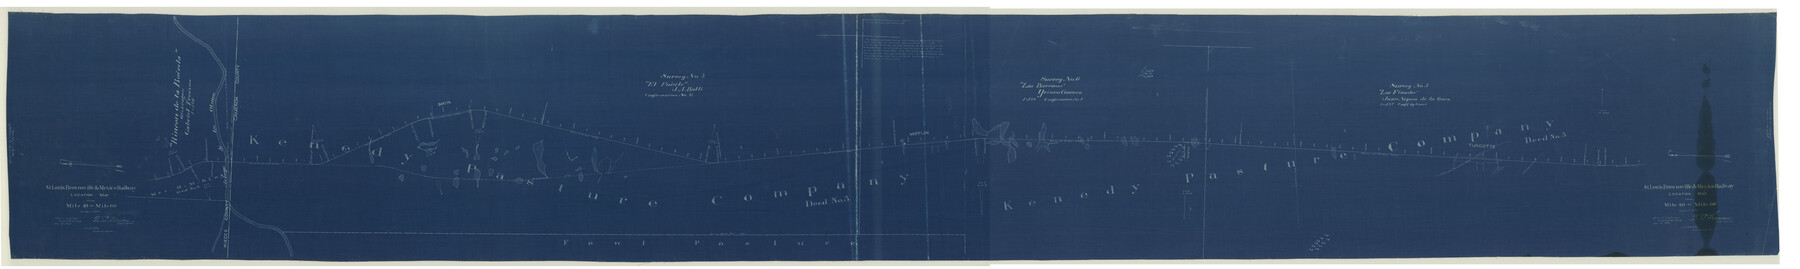 89282, St. Louis, Brownsville & Mexico Railway Location Map from Mile 40 to Mile 60, General Map Collection